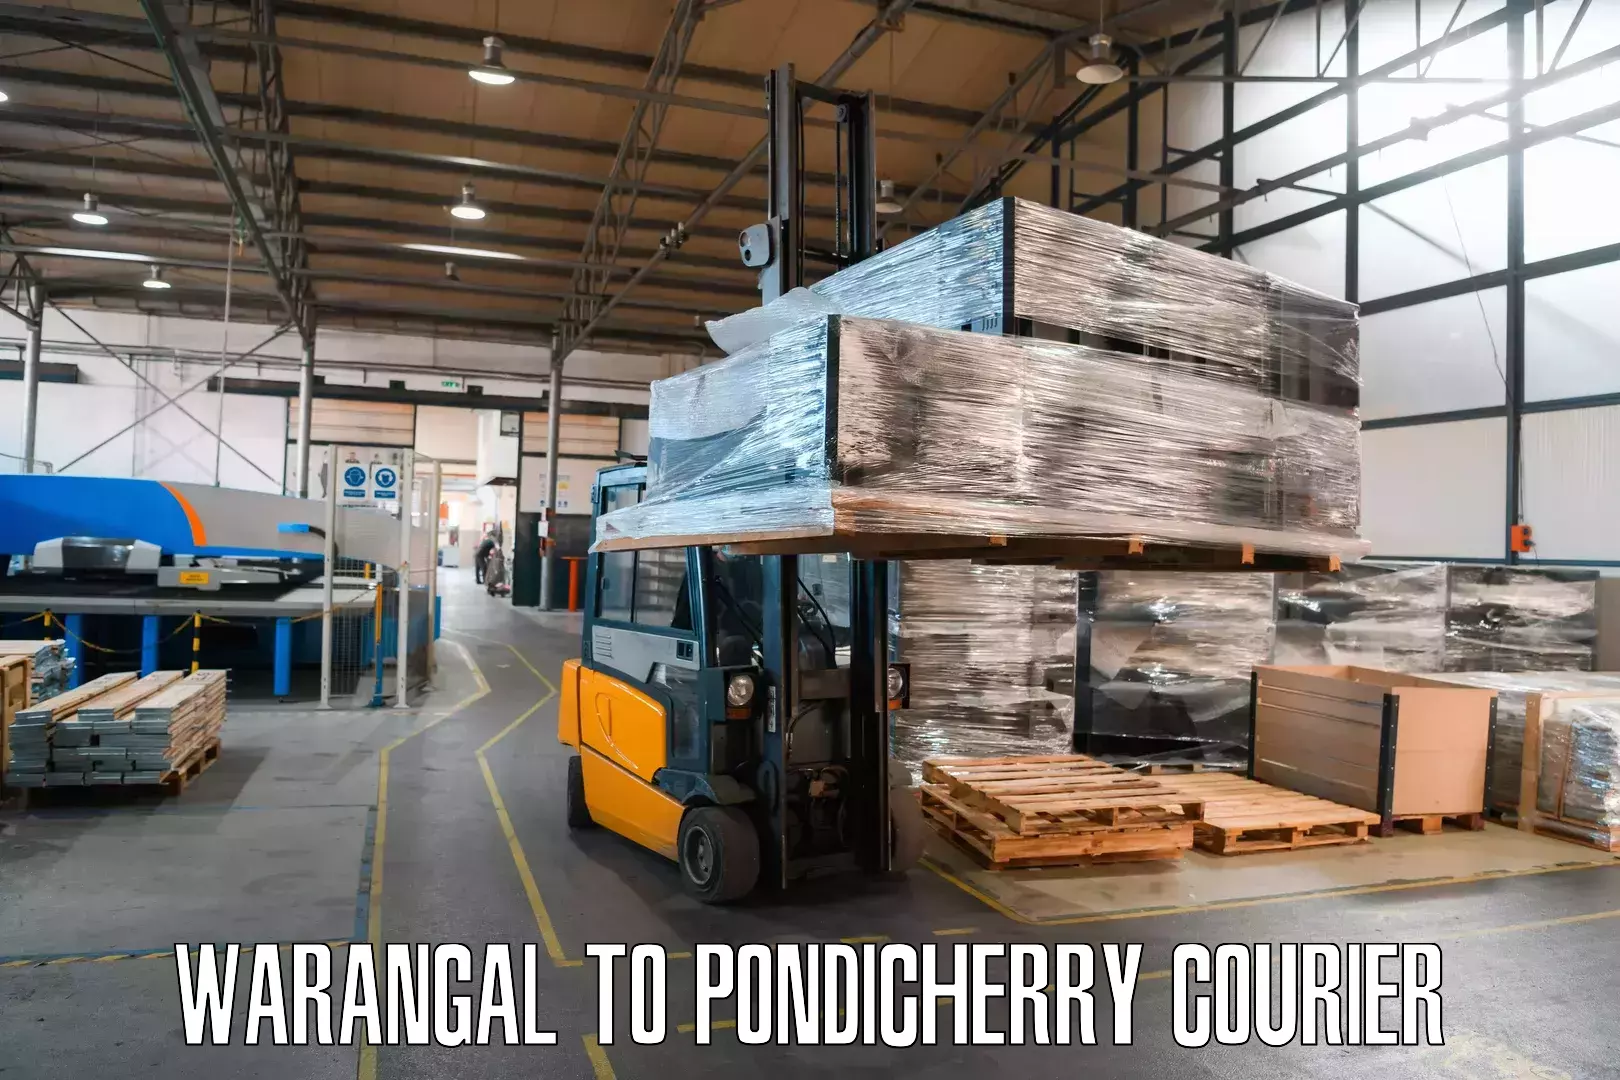 On-call courier service Warangal to Pondicherry